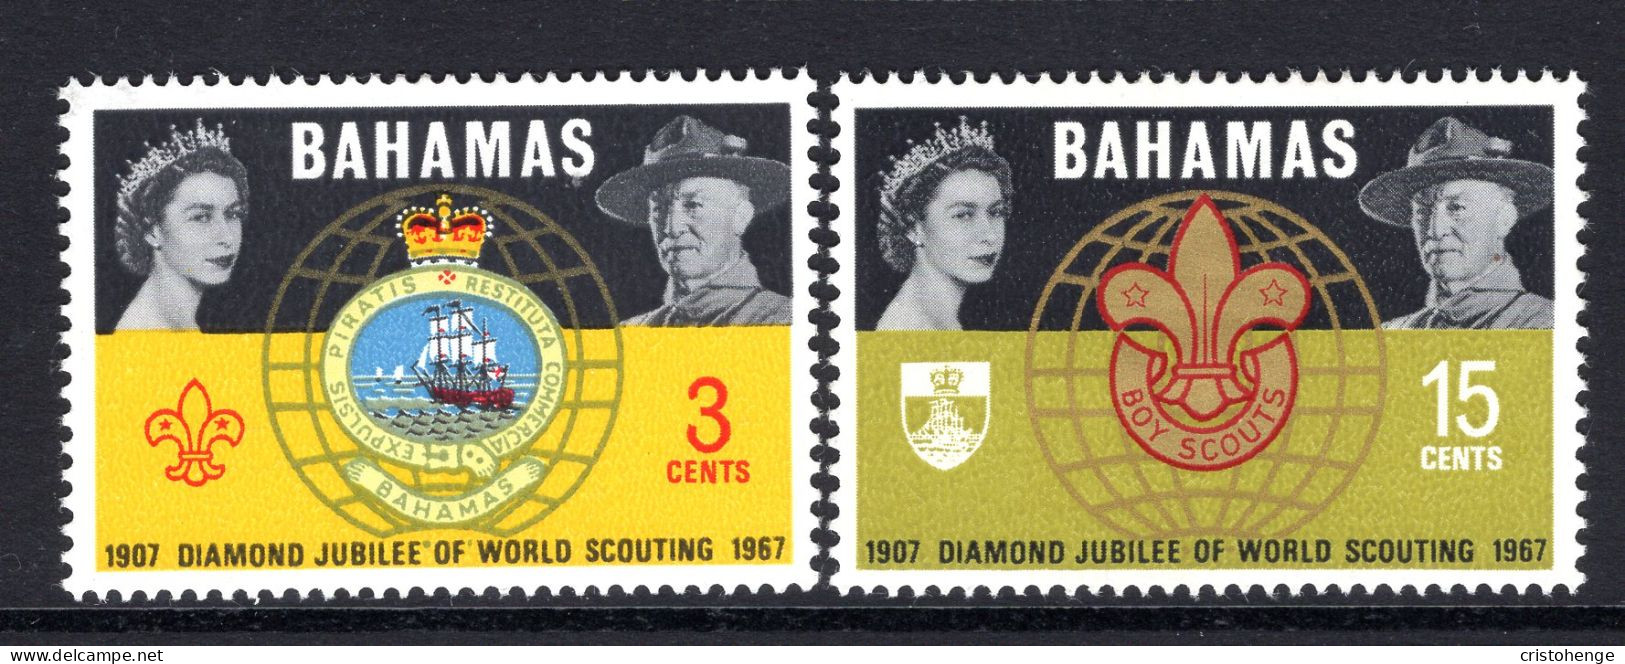 Bahamas 1967 Diamond Jubilee Of World Scouting Set LHM (SG 310-311) - 1963-1973 Ministerial Government